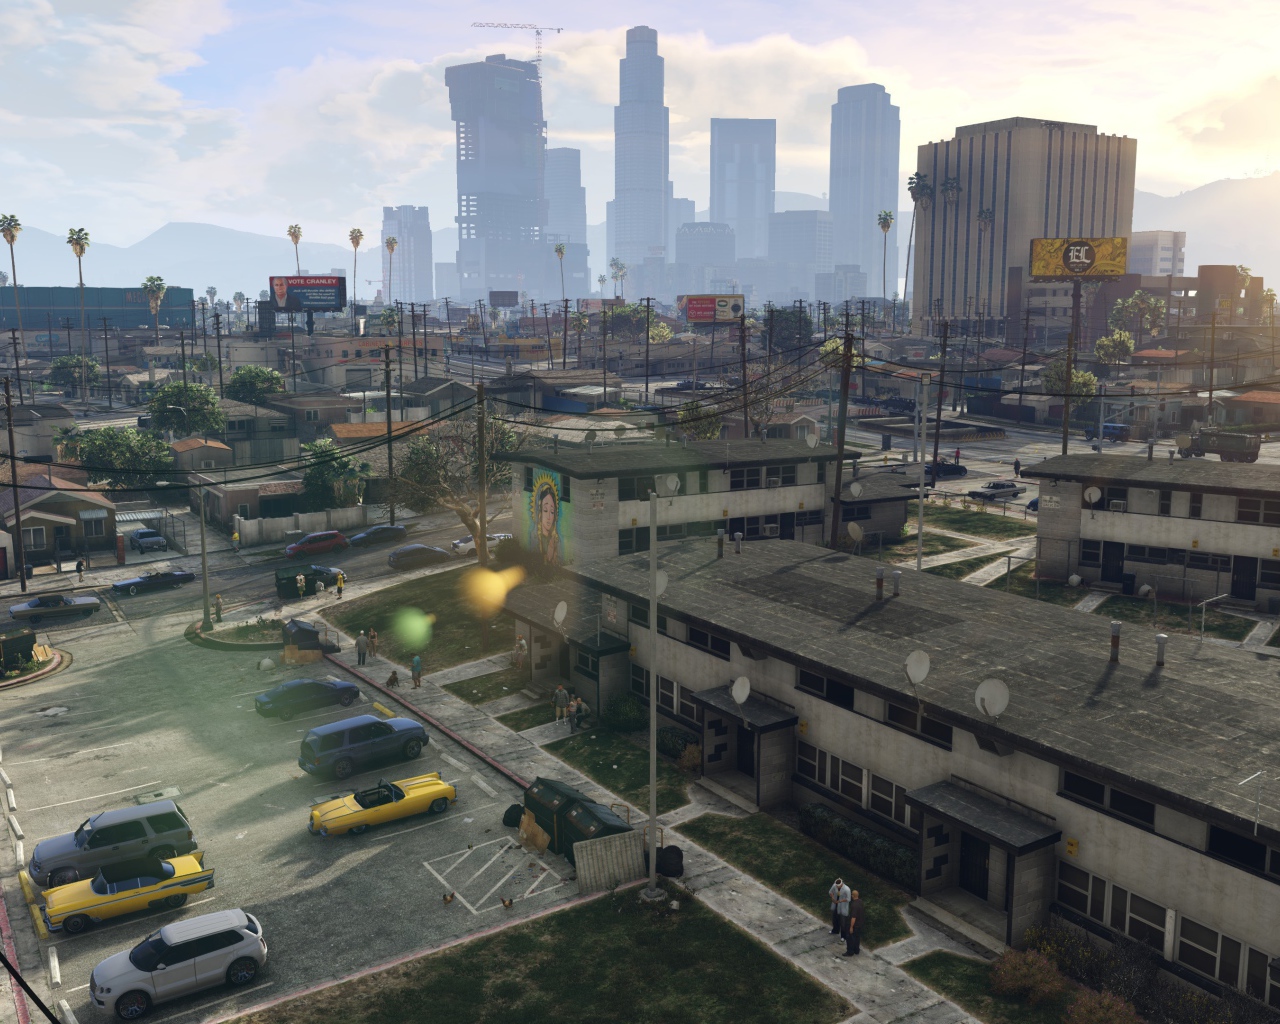 Parking in the suburbs, the game Grand Theft Auto V